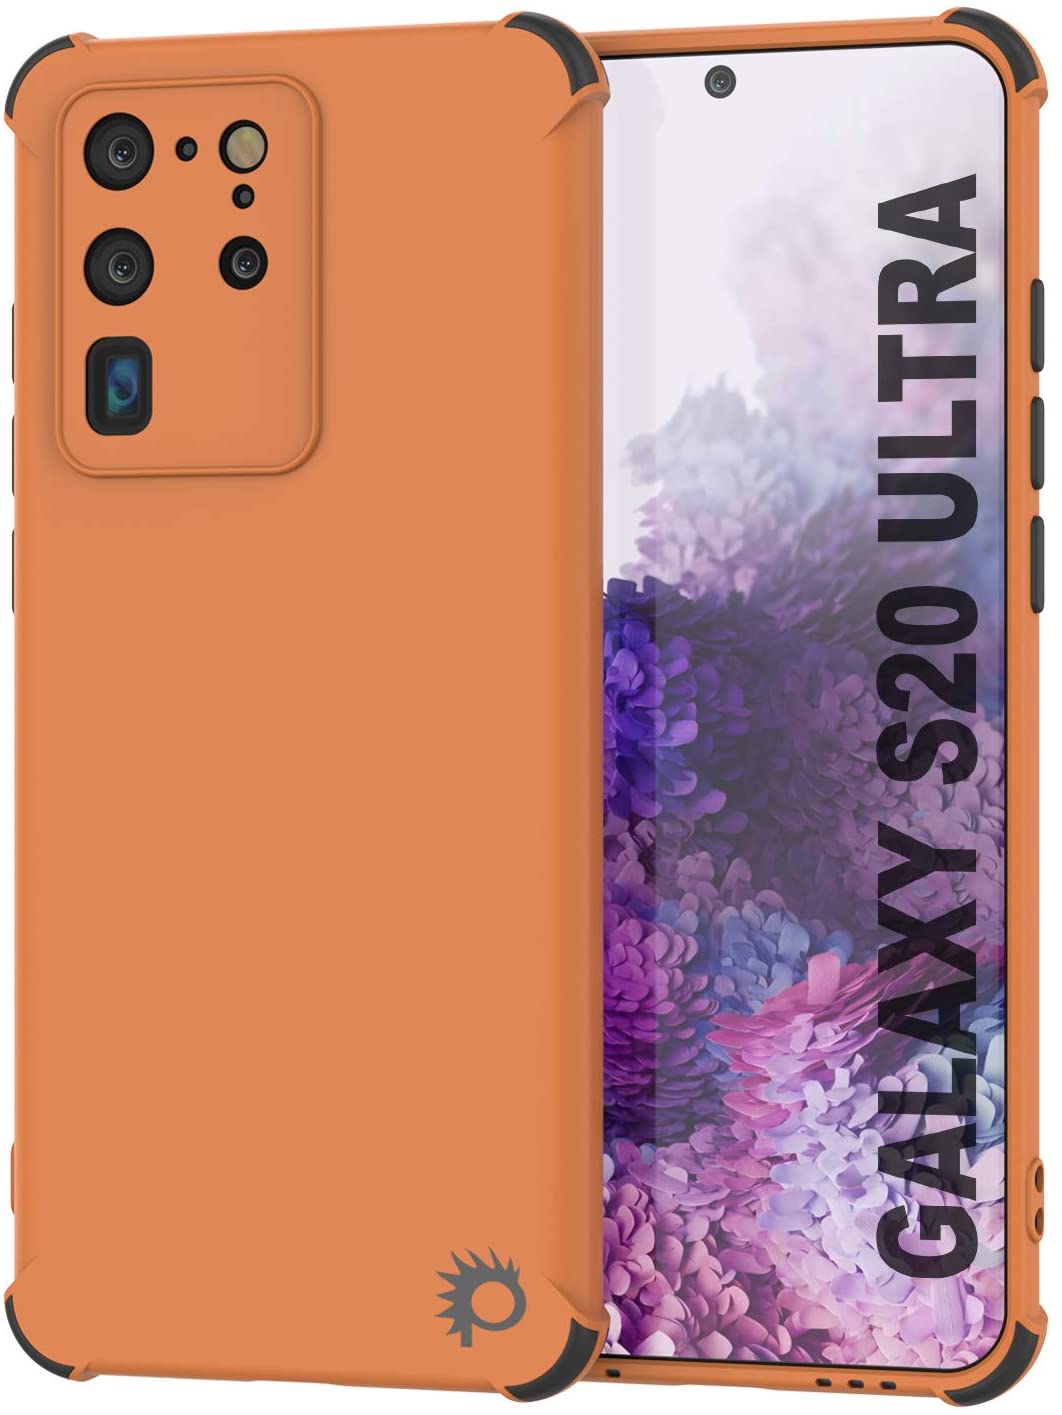 Punkcase Protective & Lightweight TPU Case [Sunshine Series] for Galaxy S20 Ultra [Orange] (Color in image: Orange)